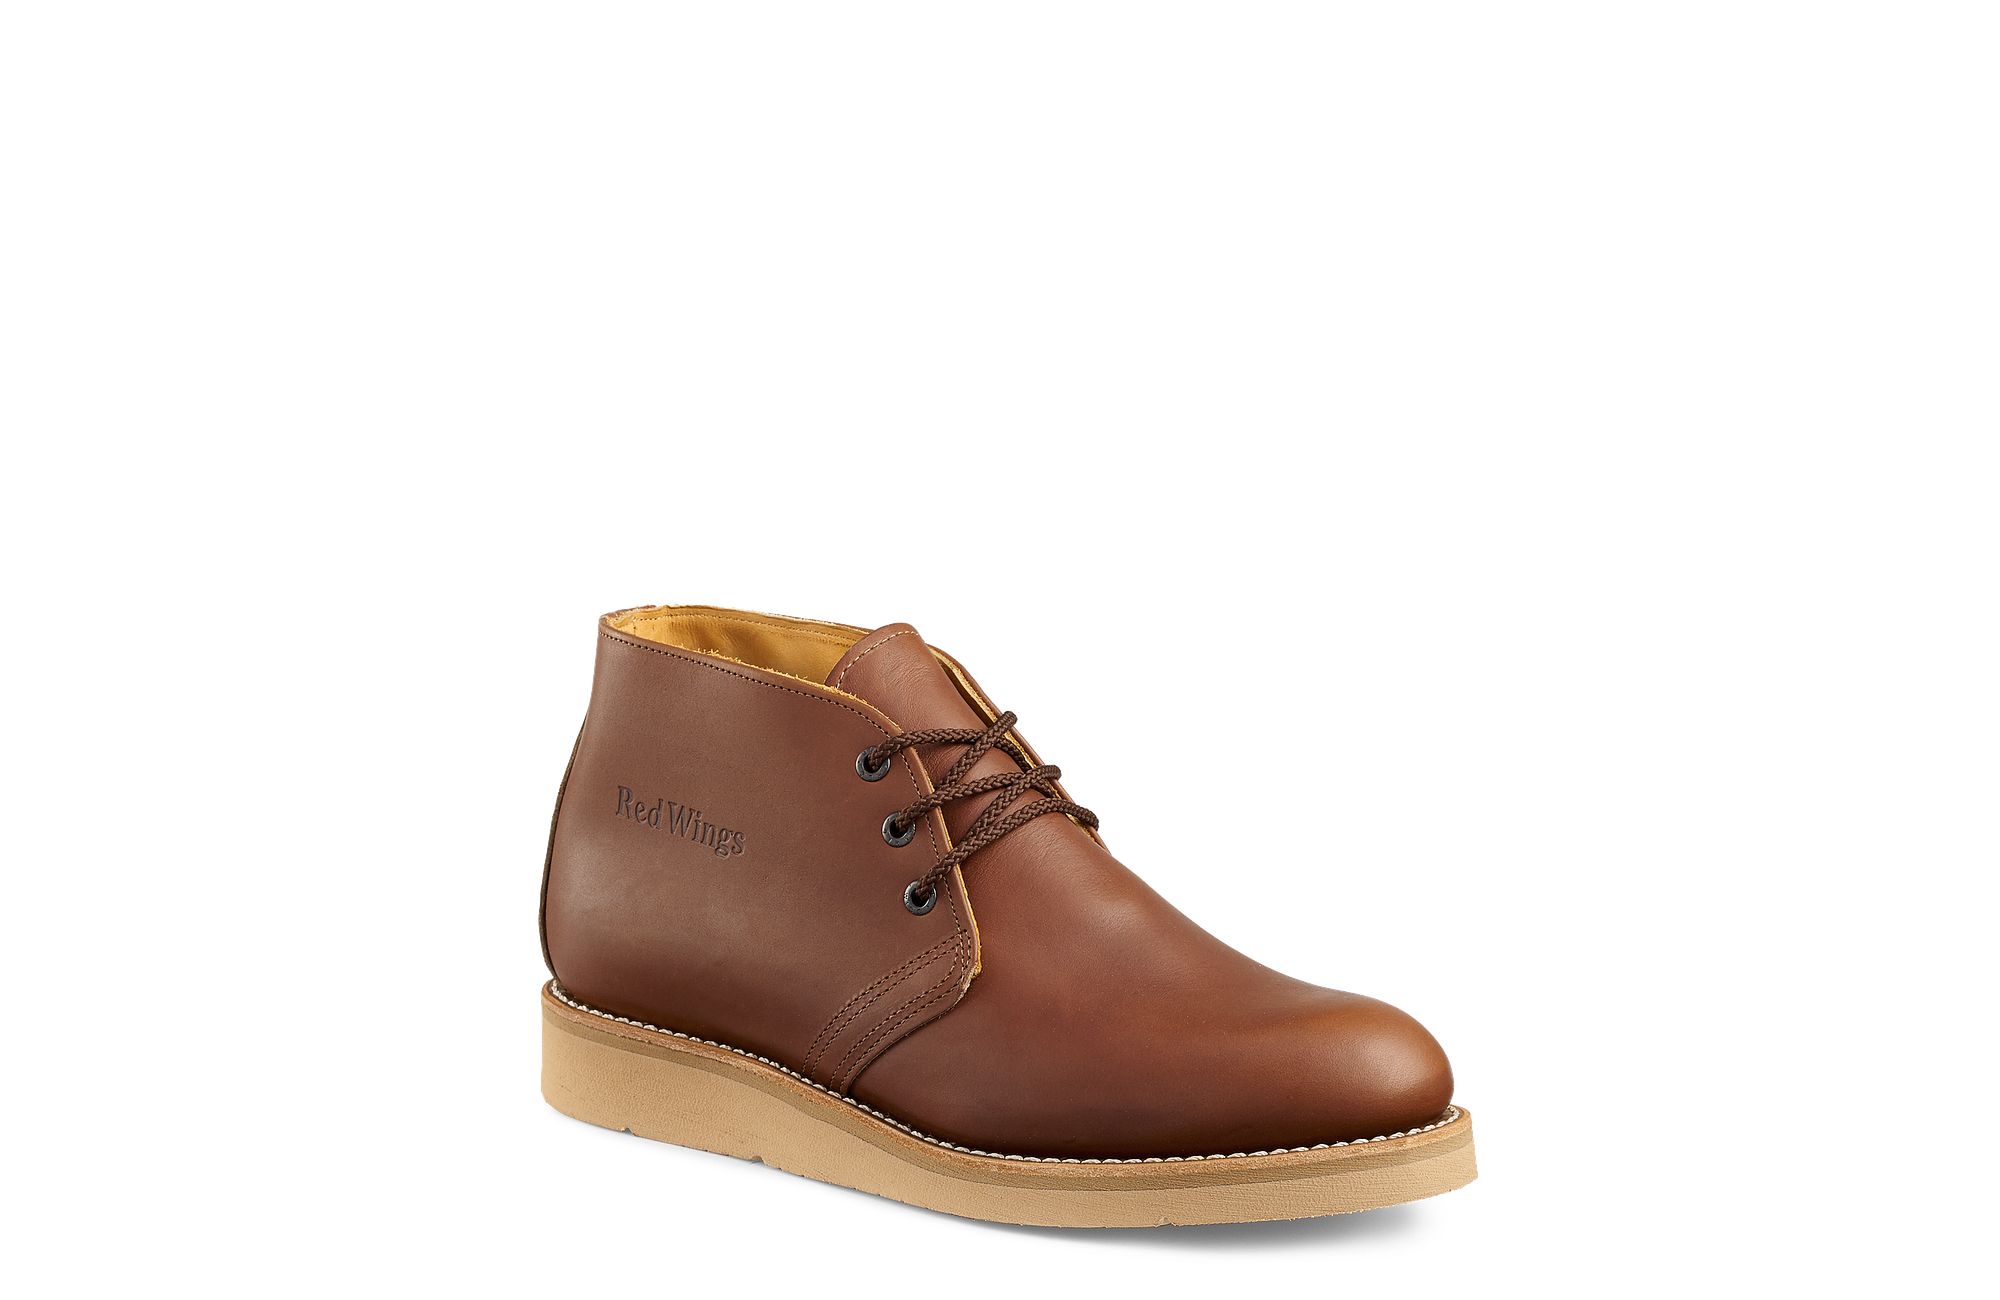 Men's Traction Tred Chukka Soft Toe Boot 595 | RedWing